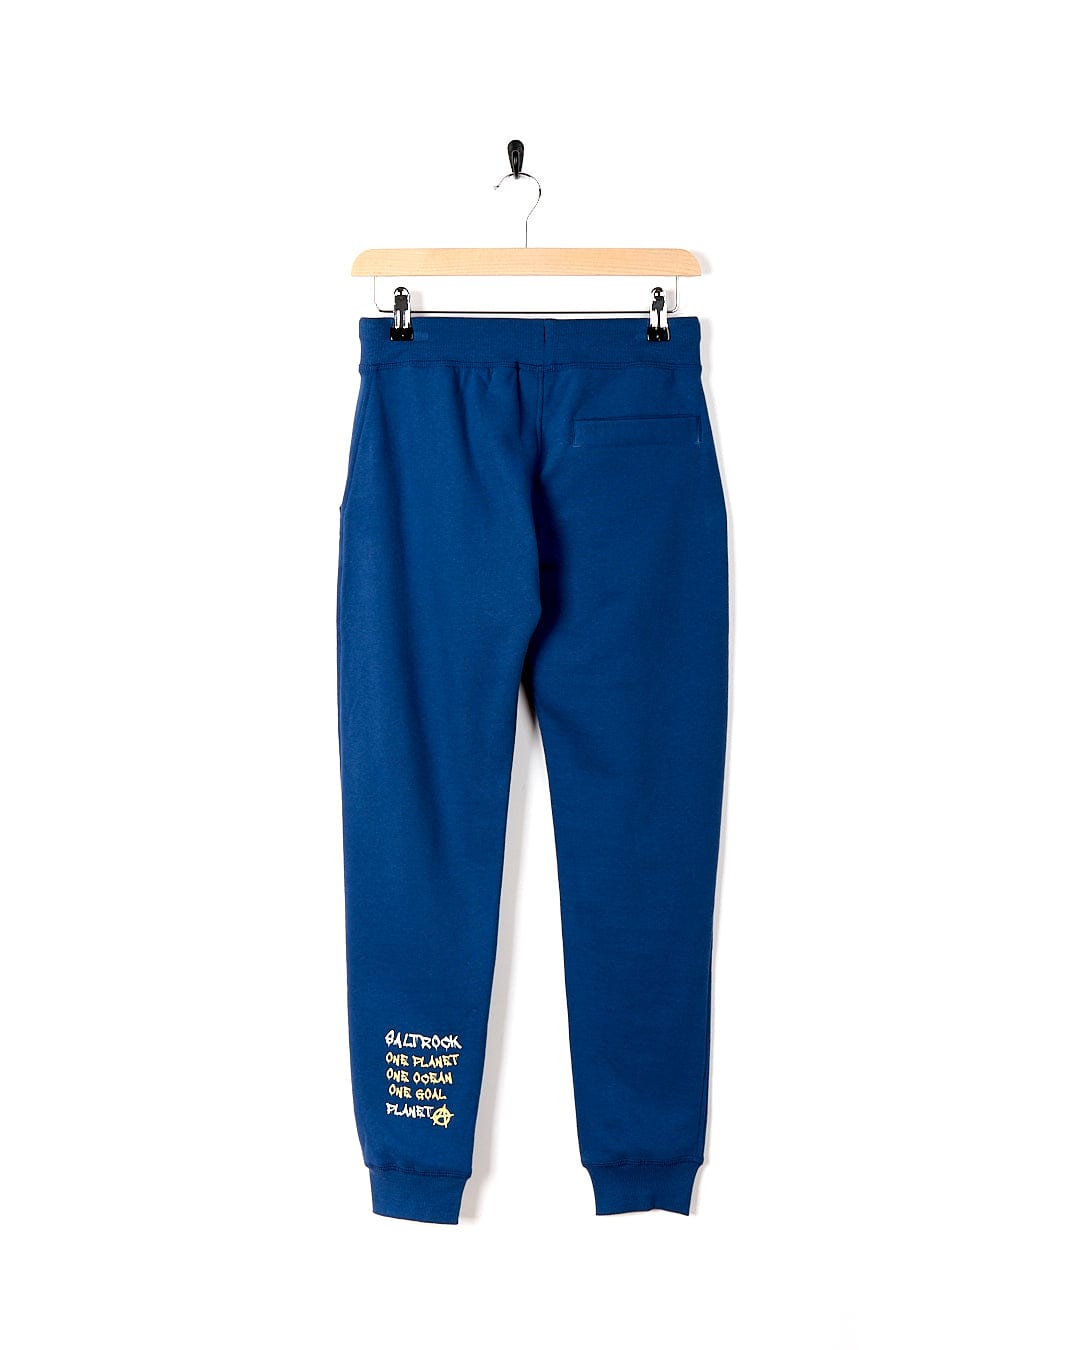 An Activist A - Kids Jogger - Dark Blue jogging pant with yellow writing on it by Saltrock.